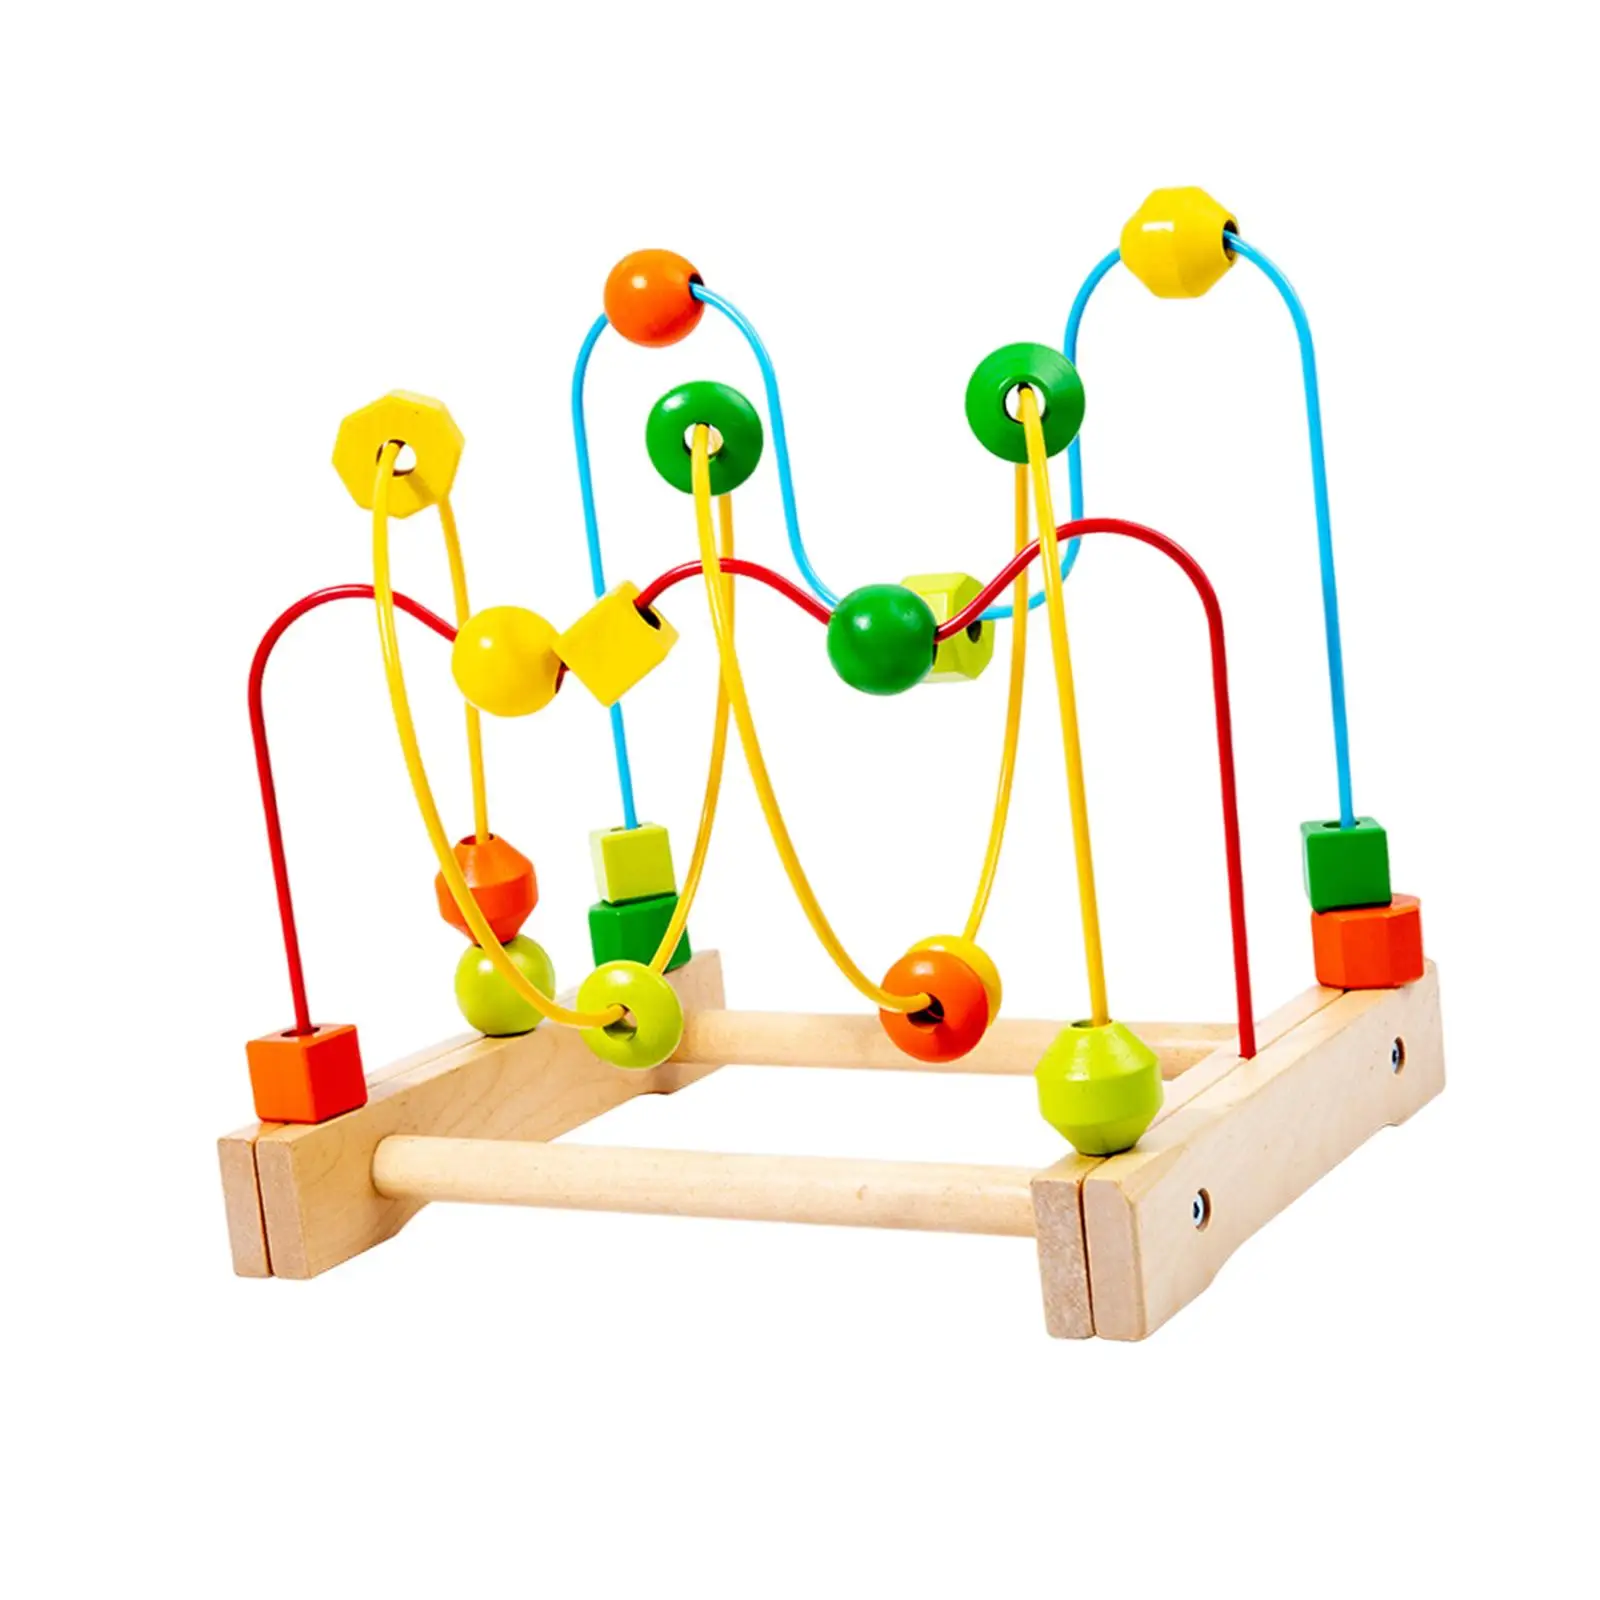 Bead Toy Training Child Attention Ability Developmental Toy for Baby